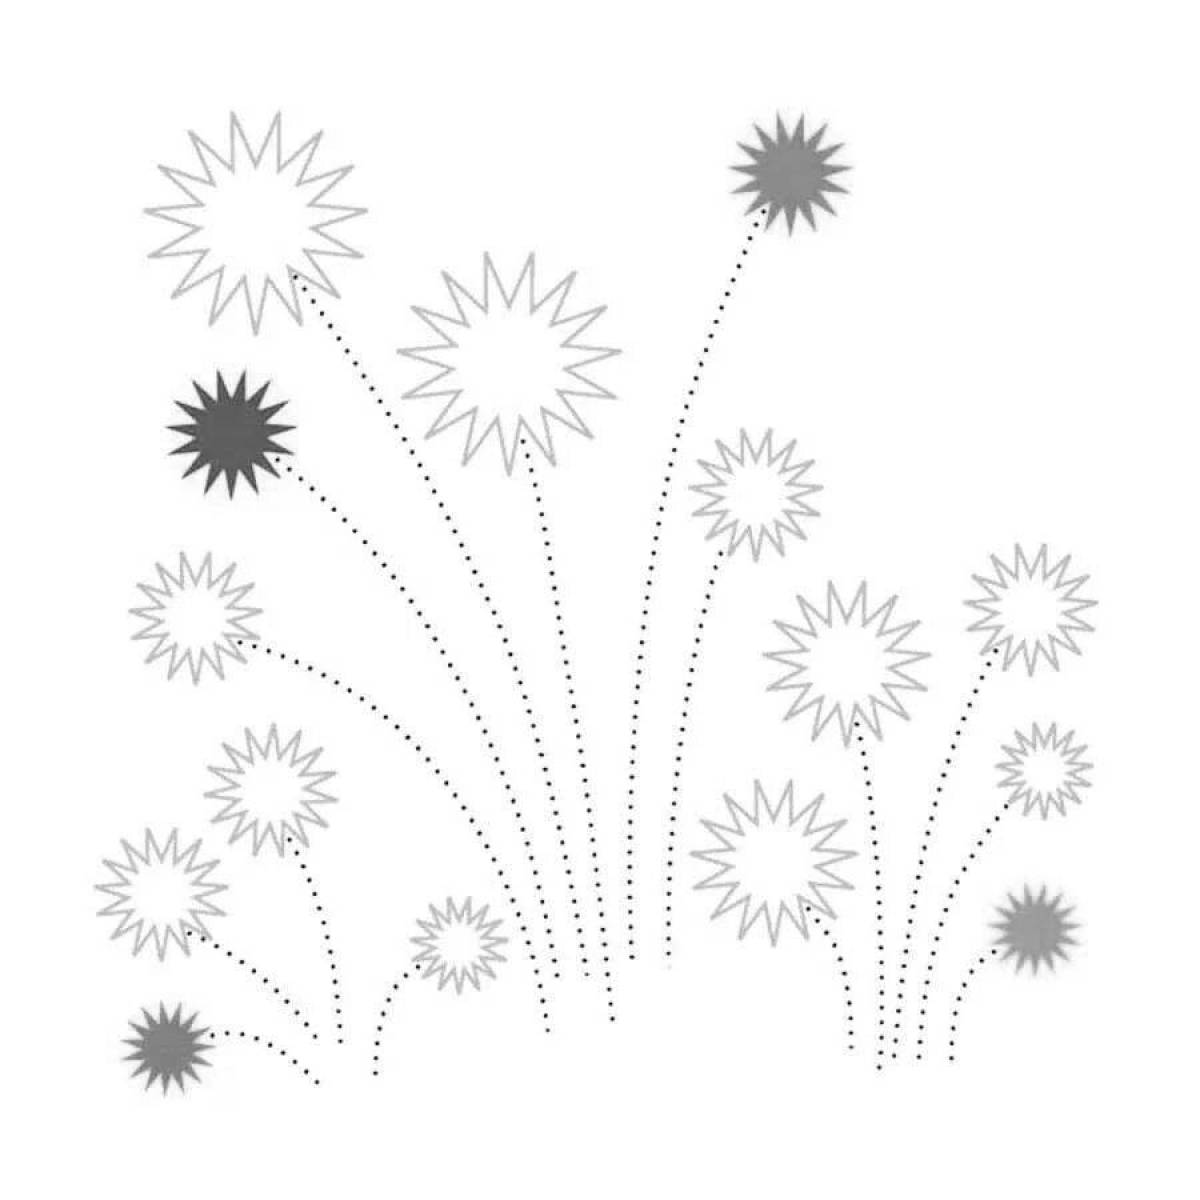 Shiny fireworks coloring book for kids